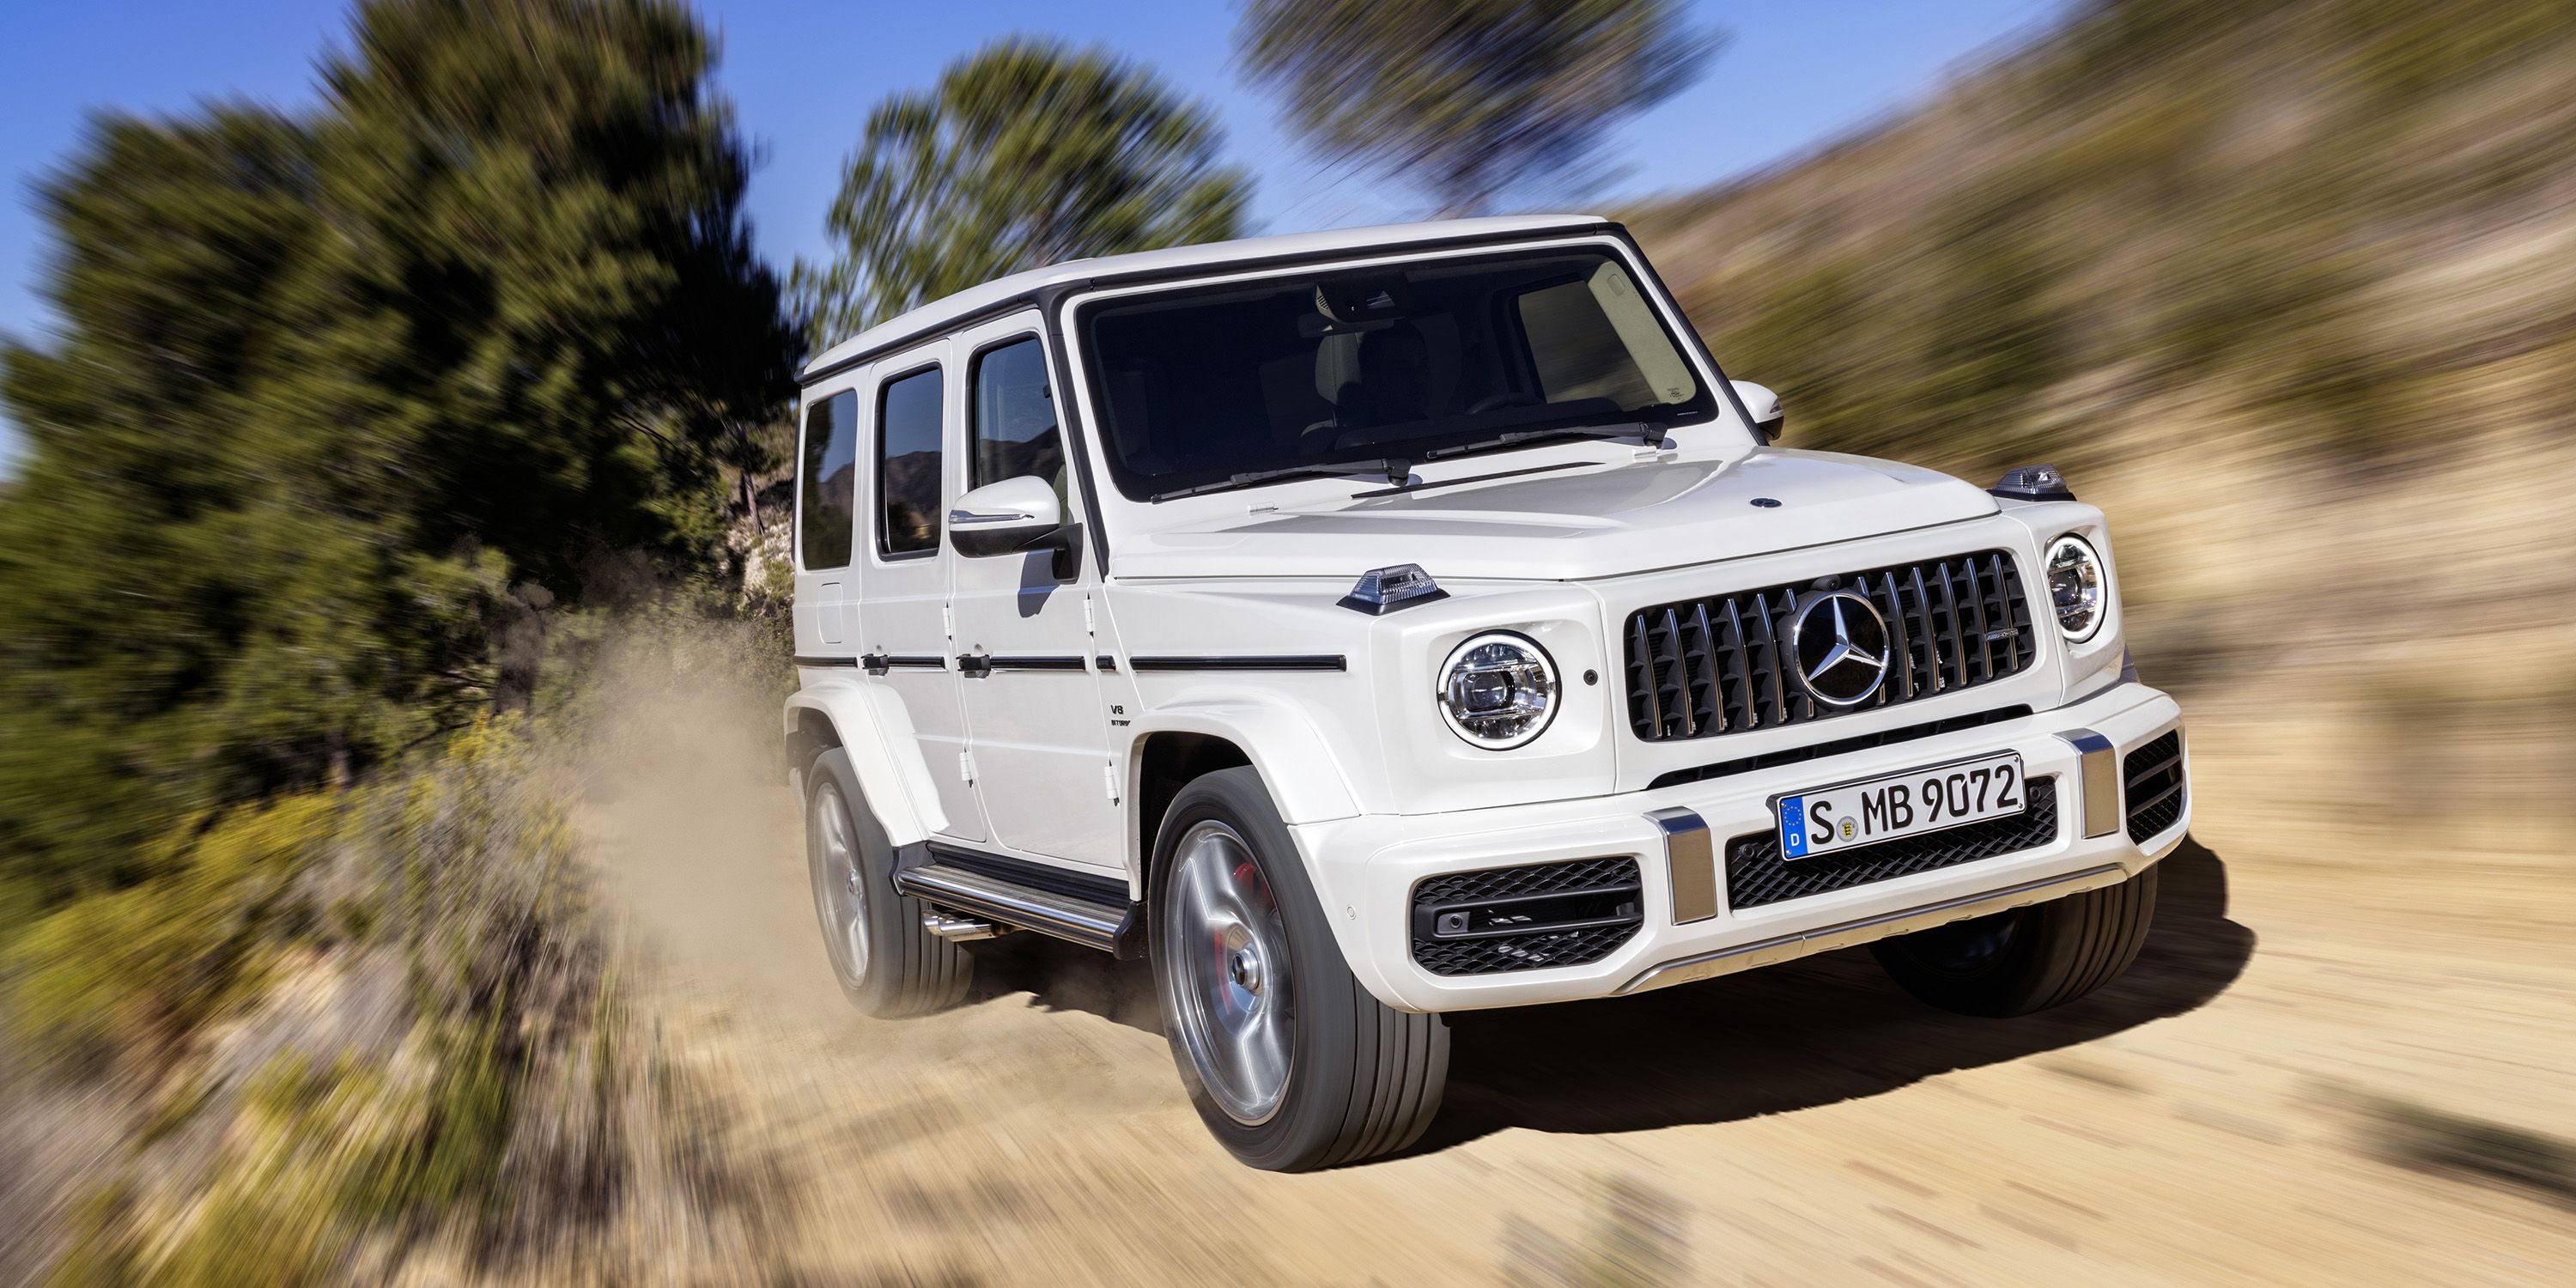 Why The G Wagen Had To Change